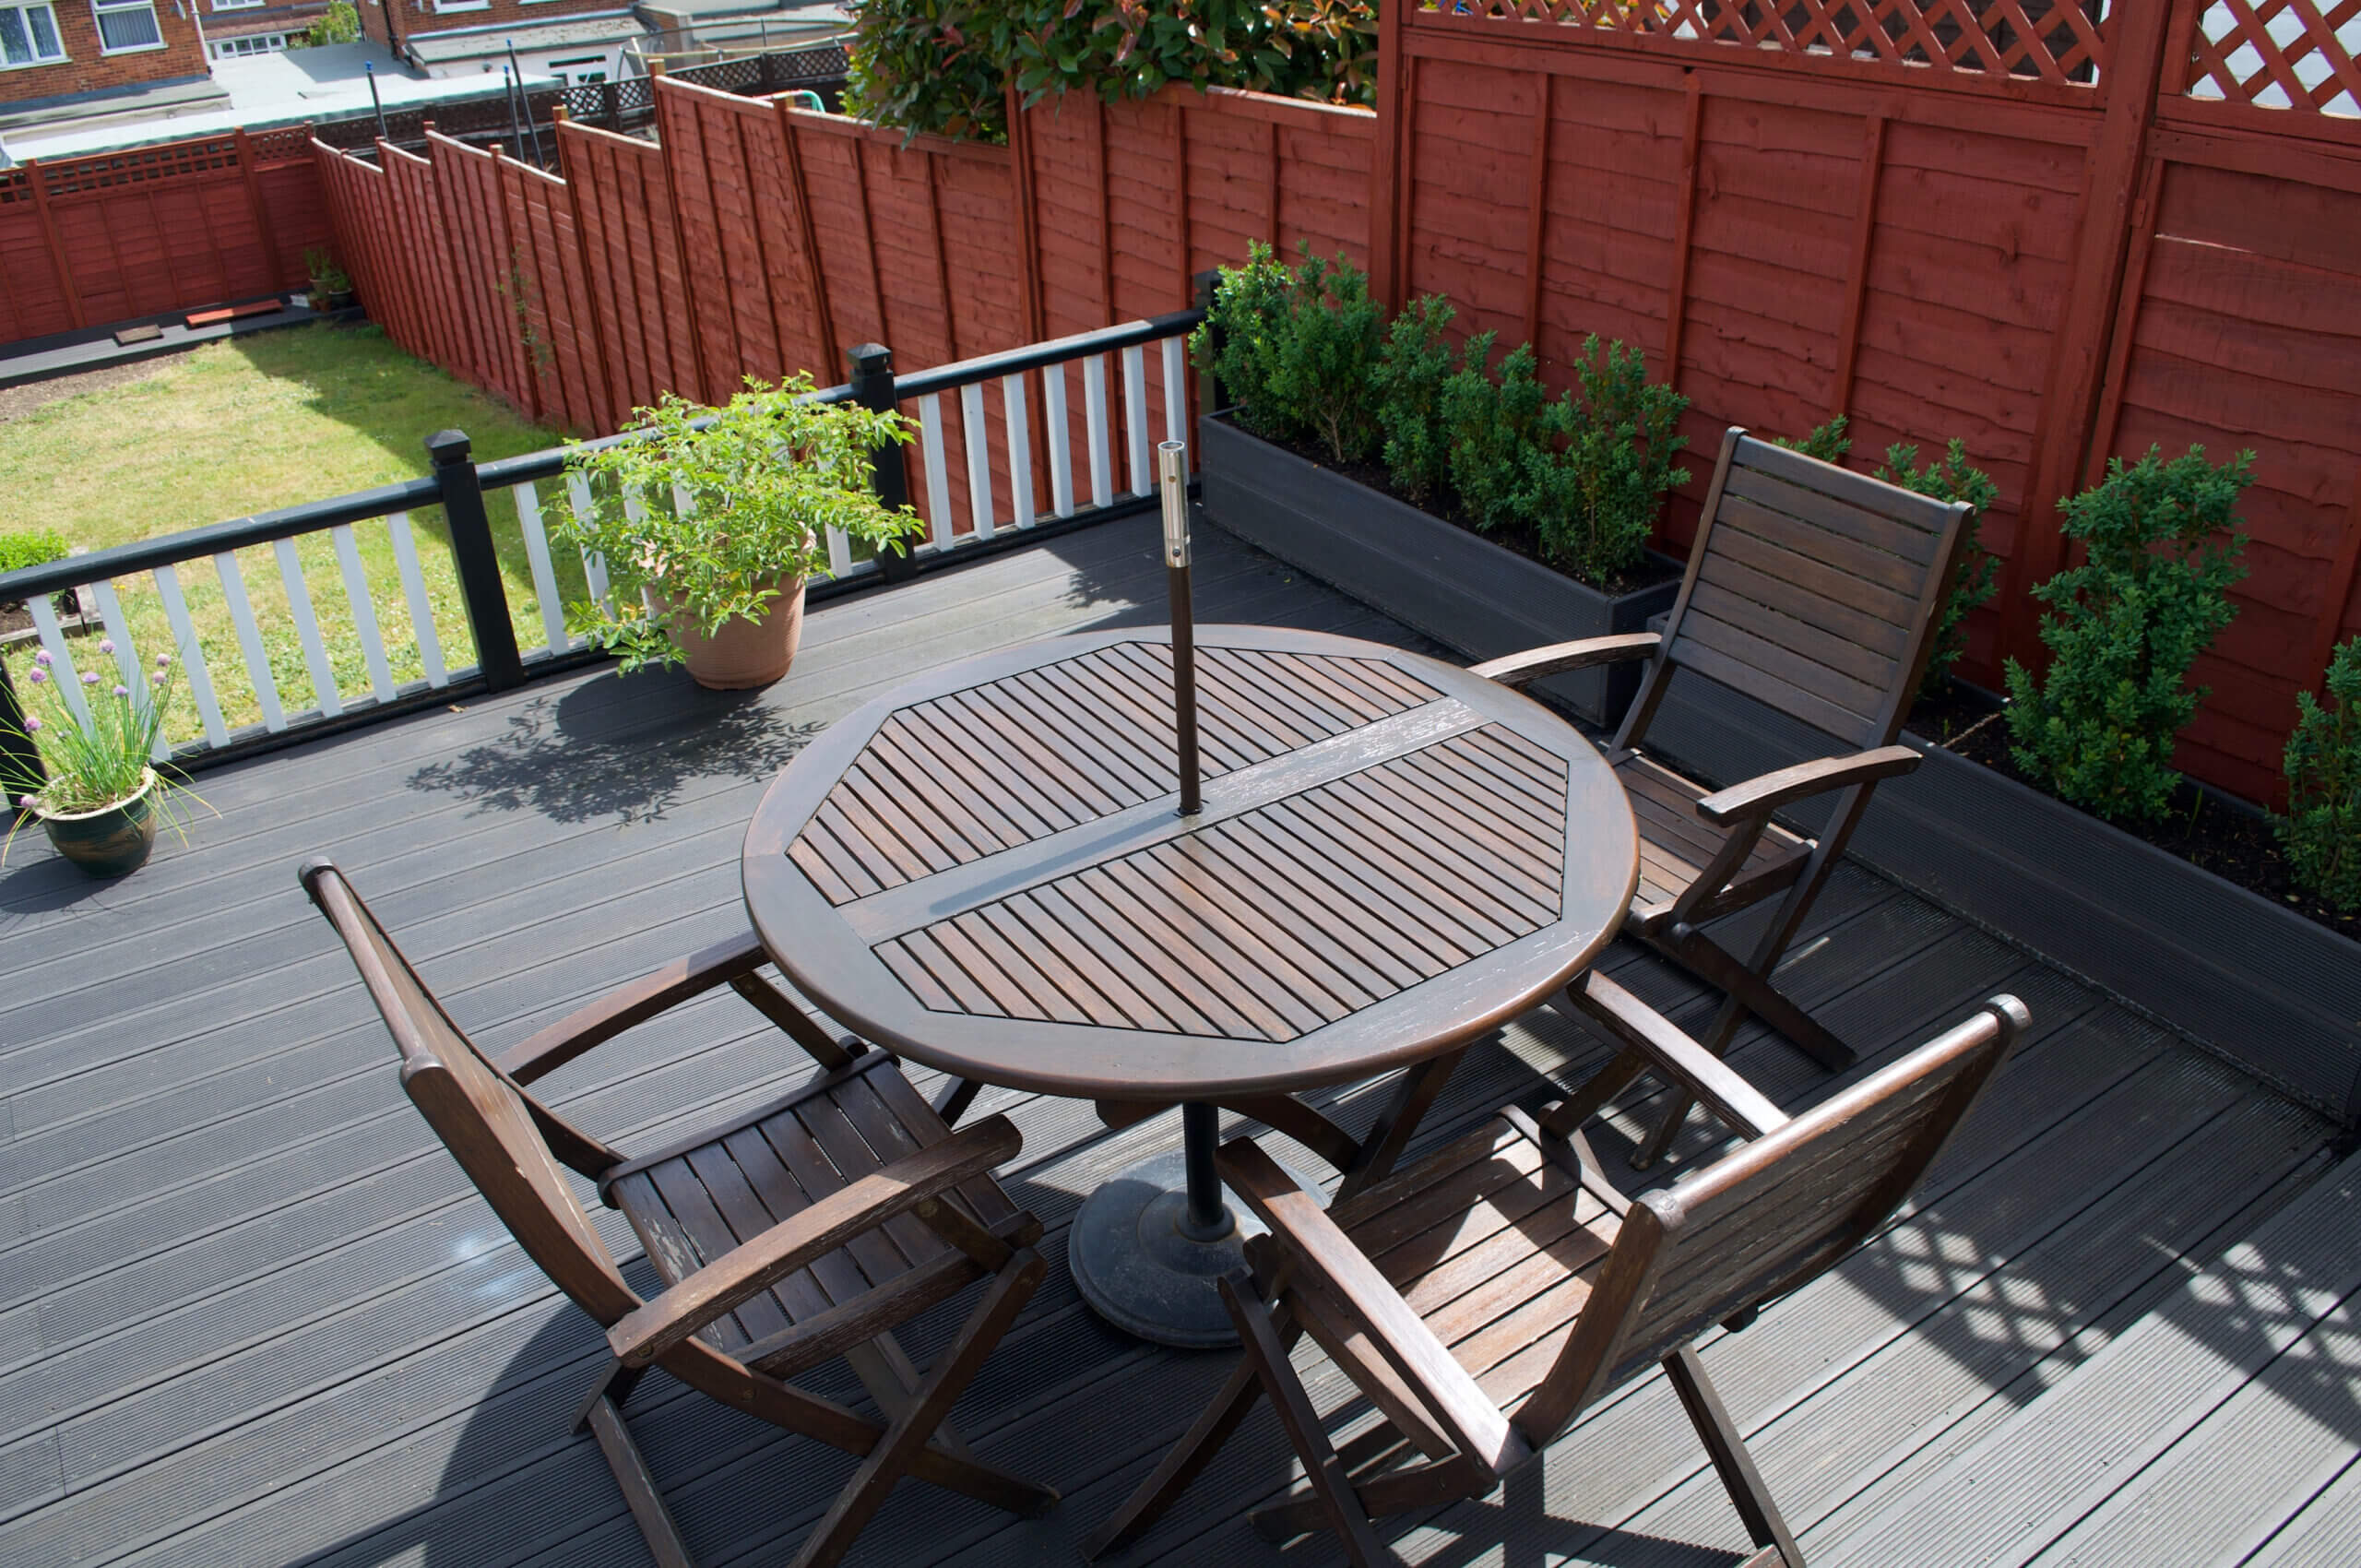 composite decking with garden planters